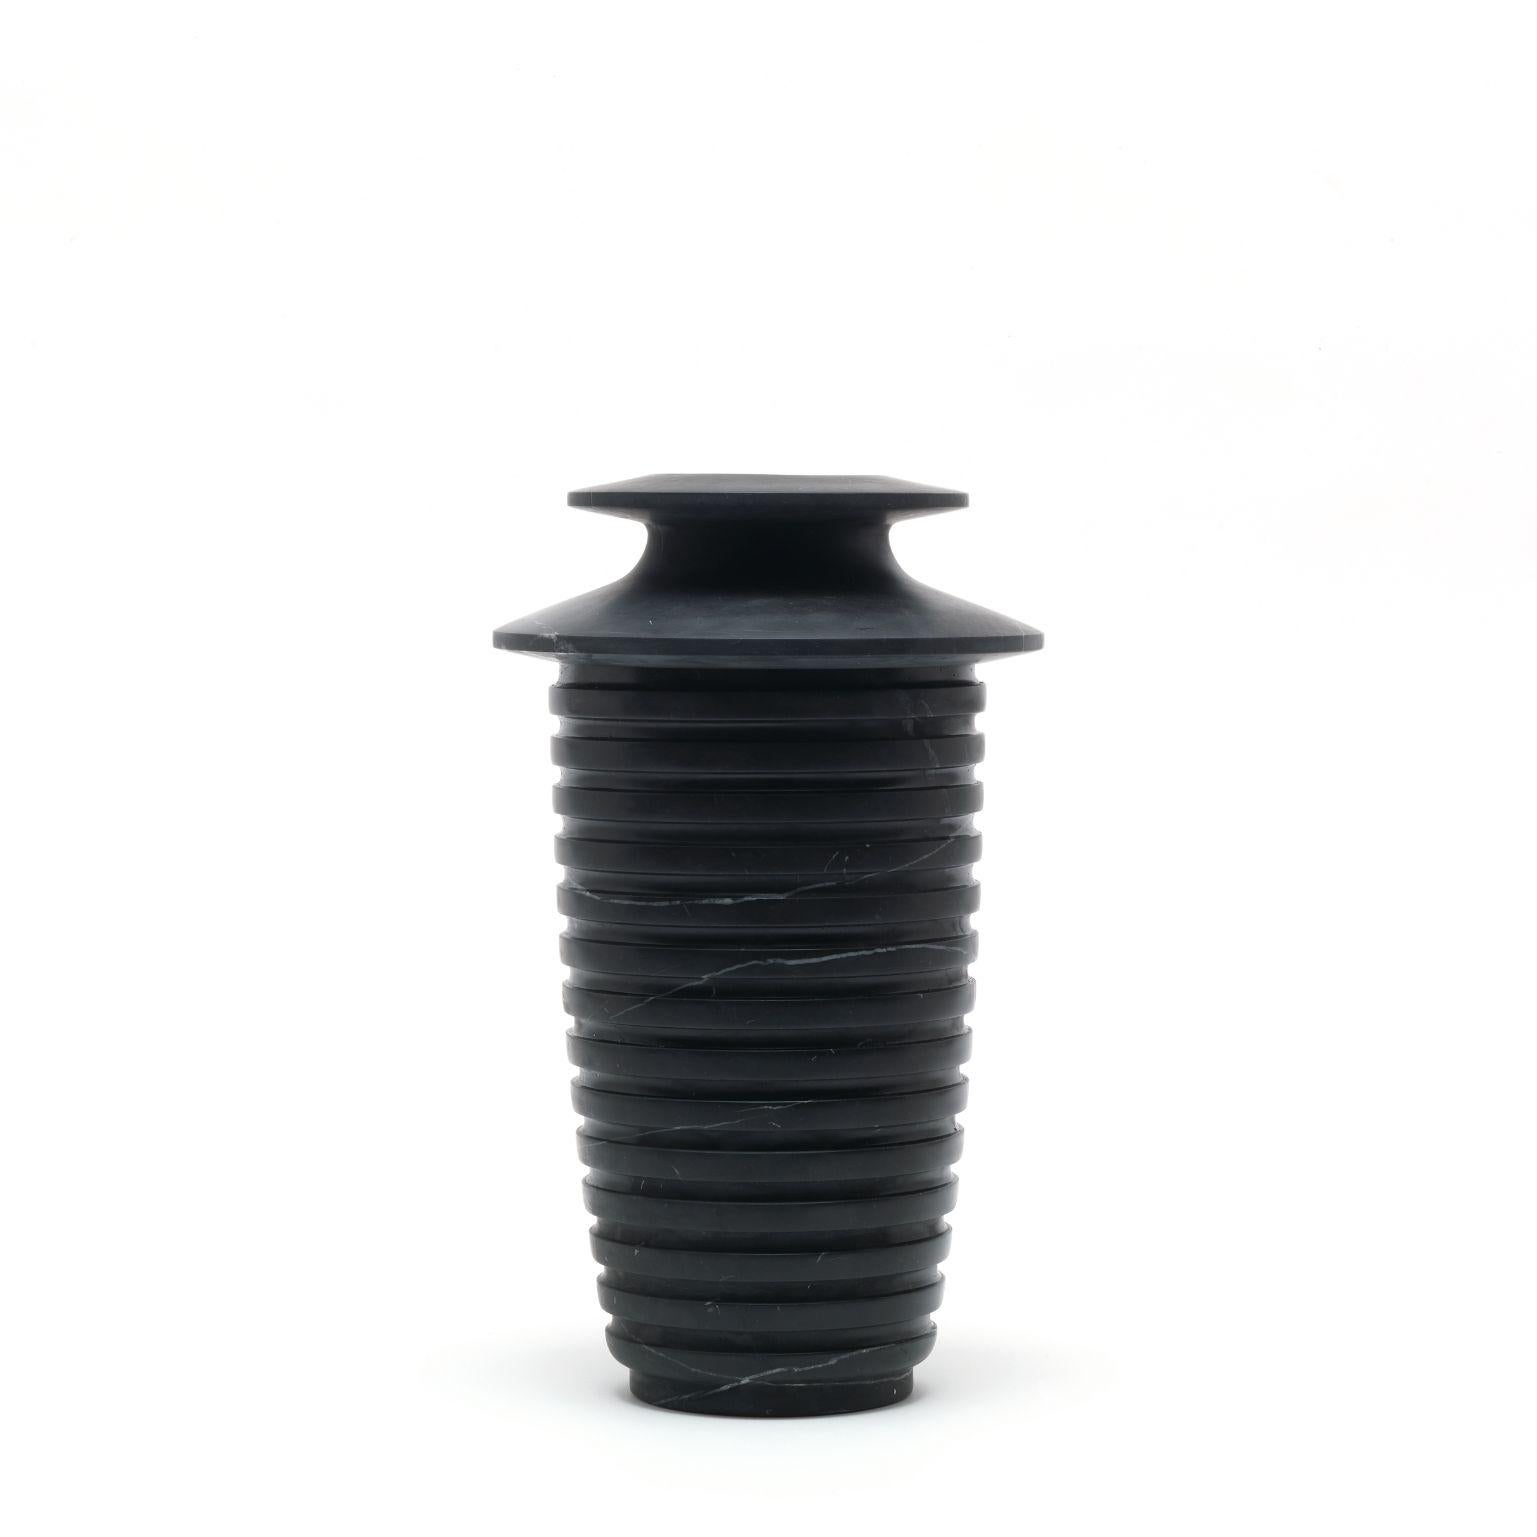 Capua large vase by Ivan Colominas
Capua Collection
Dimensions: 19 x 32 cm
Materials: Nero Marquinia

Also available: Medium,

A vase that’s an homage to design and to marble itself: the Marquinia veins look skyward, toward the crater defined